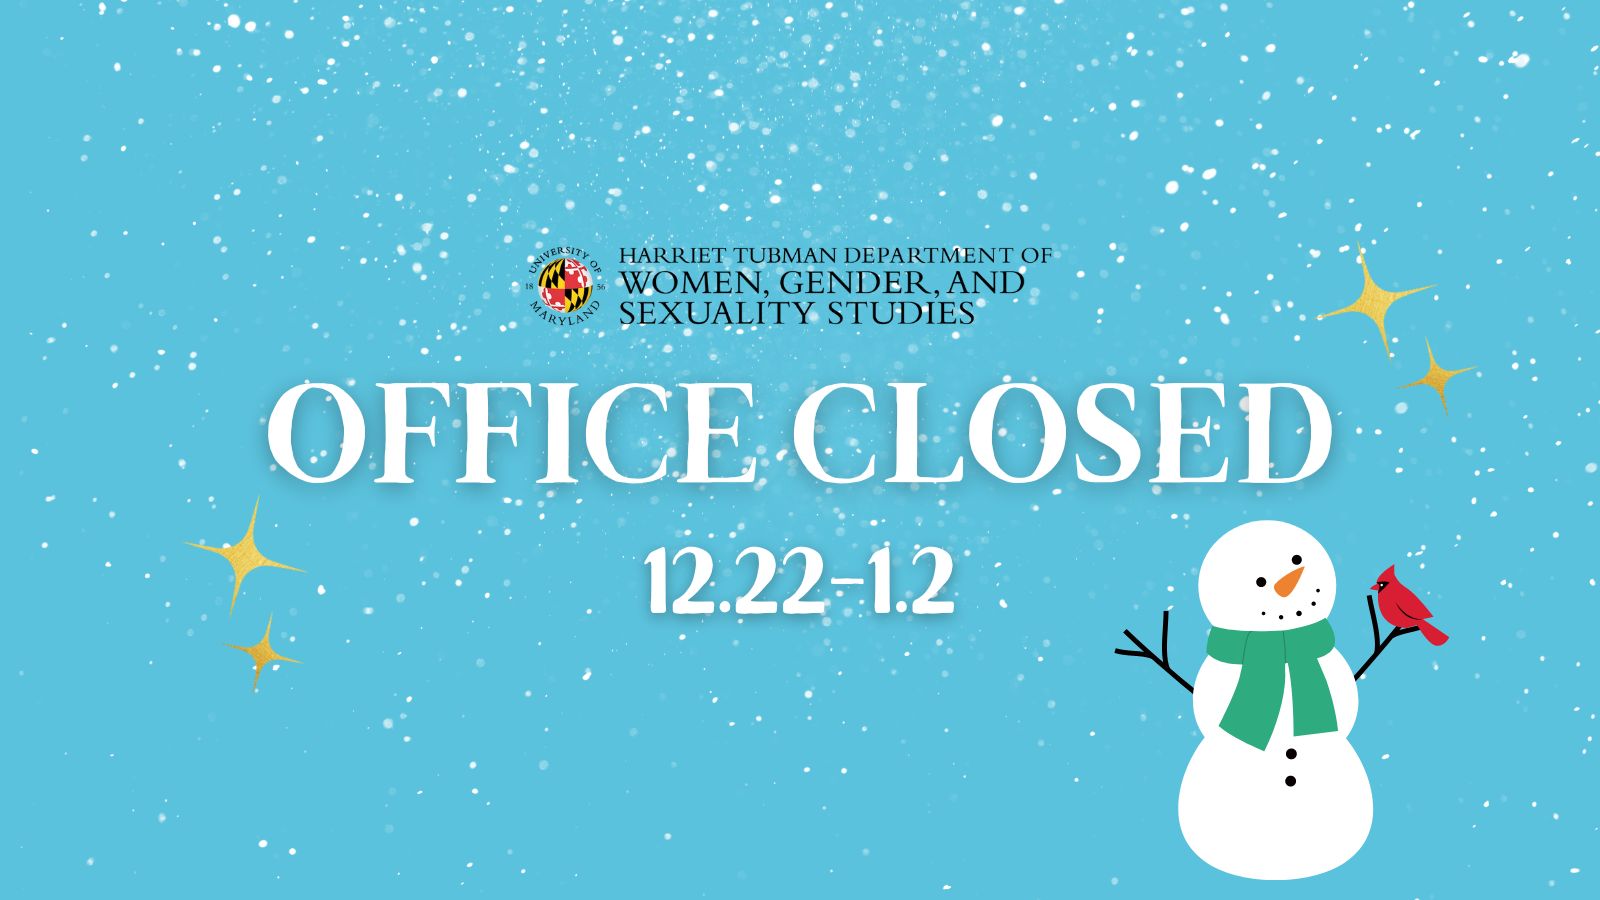 A snowman on a blue background announces the office is closed